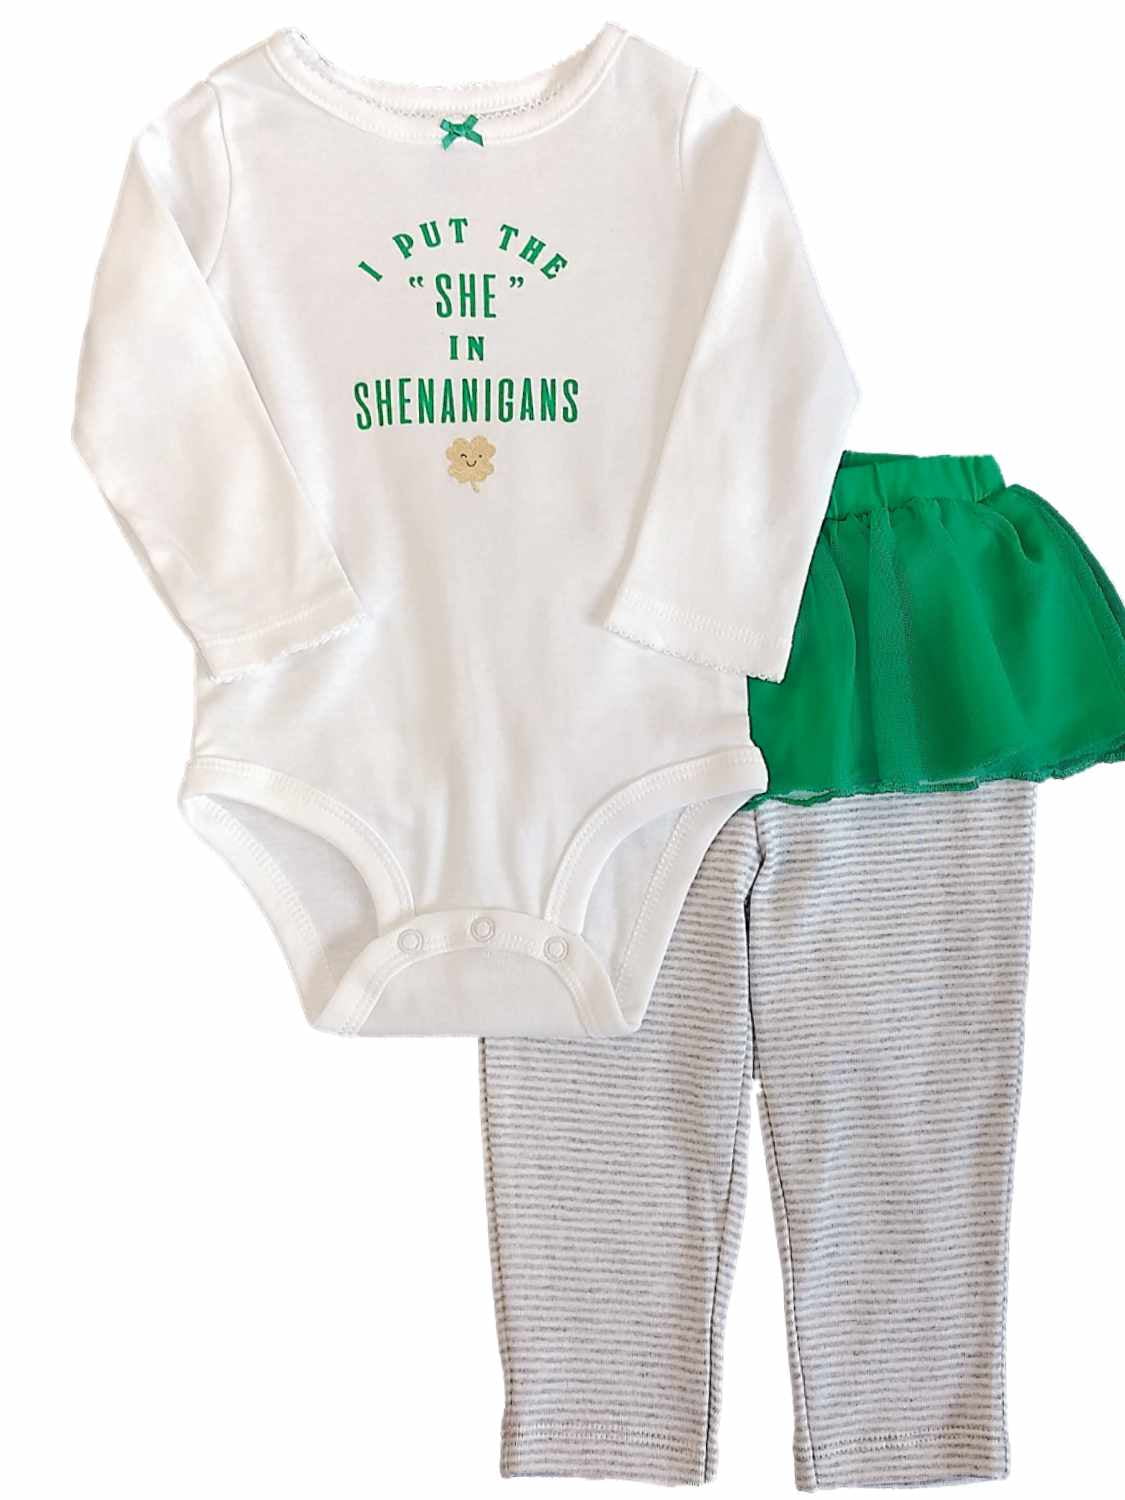 baby girl st patrick's day outfit